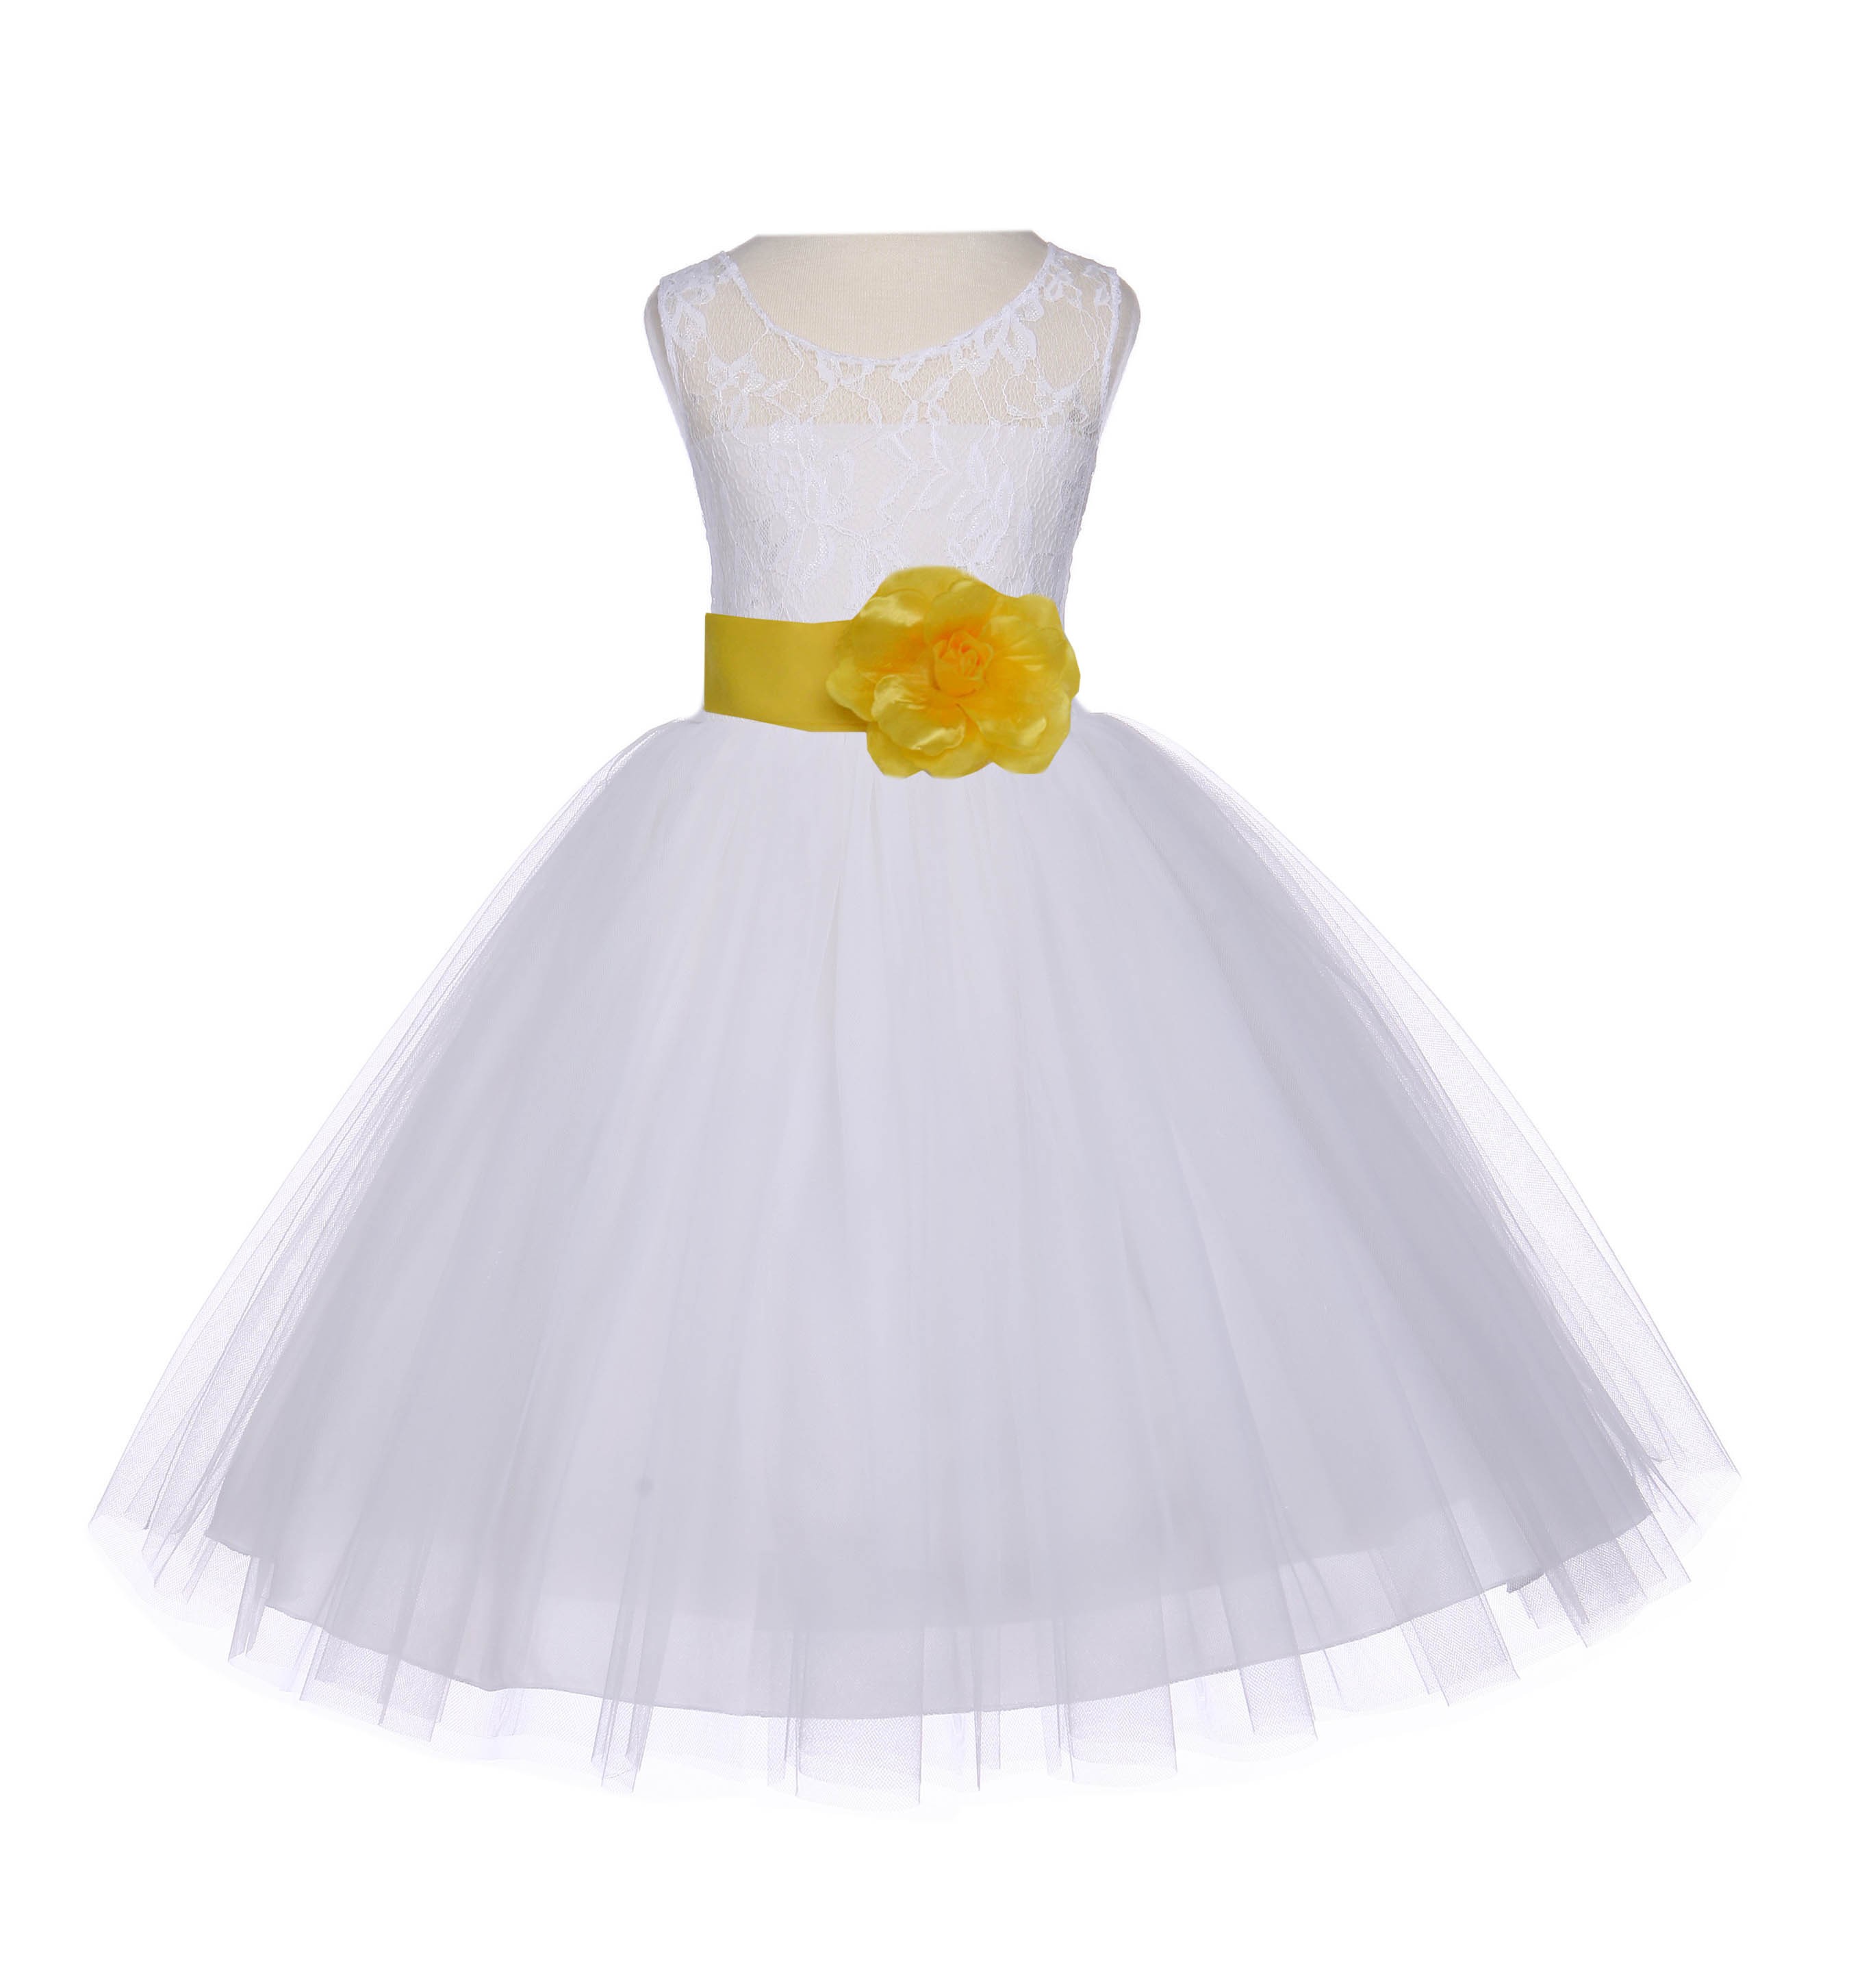 Ivory/Sunbeam Floral Lace Bodice Tulle Flower Girl Dress Bridesmaid 153S